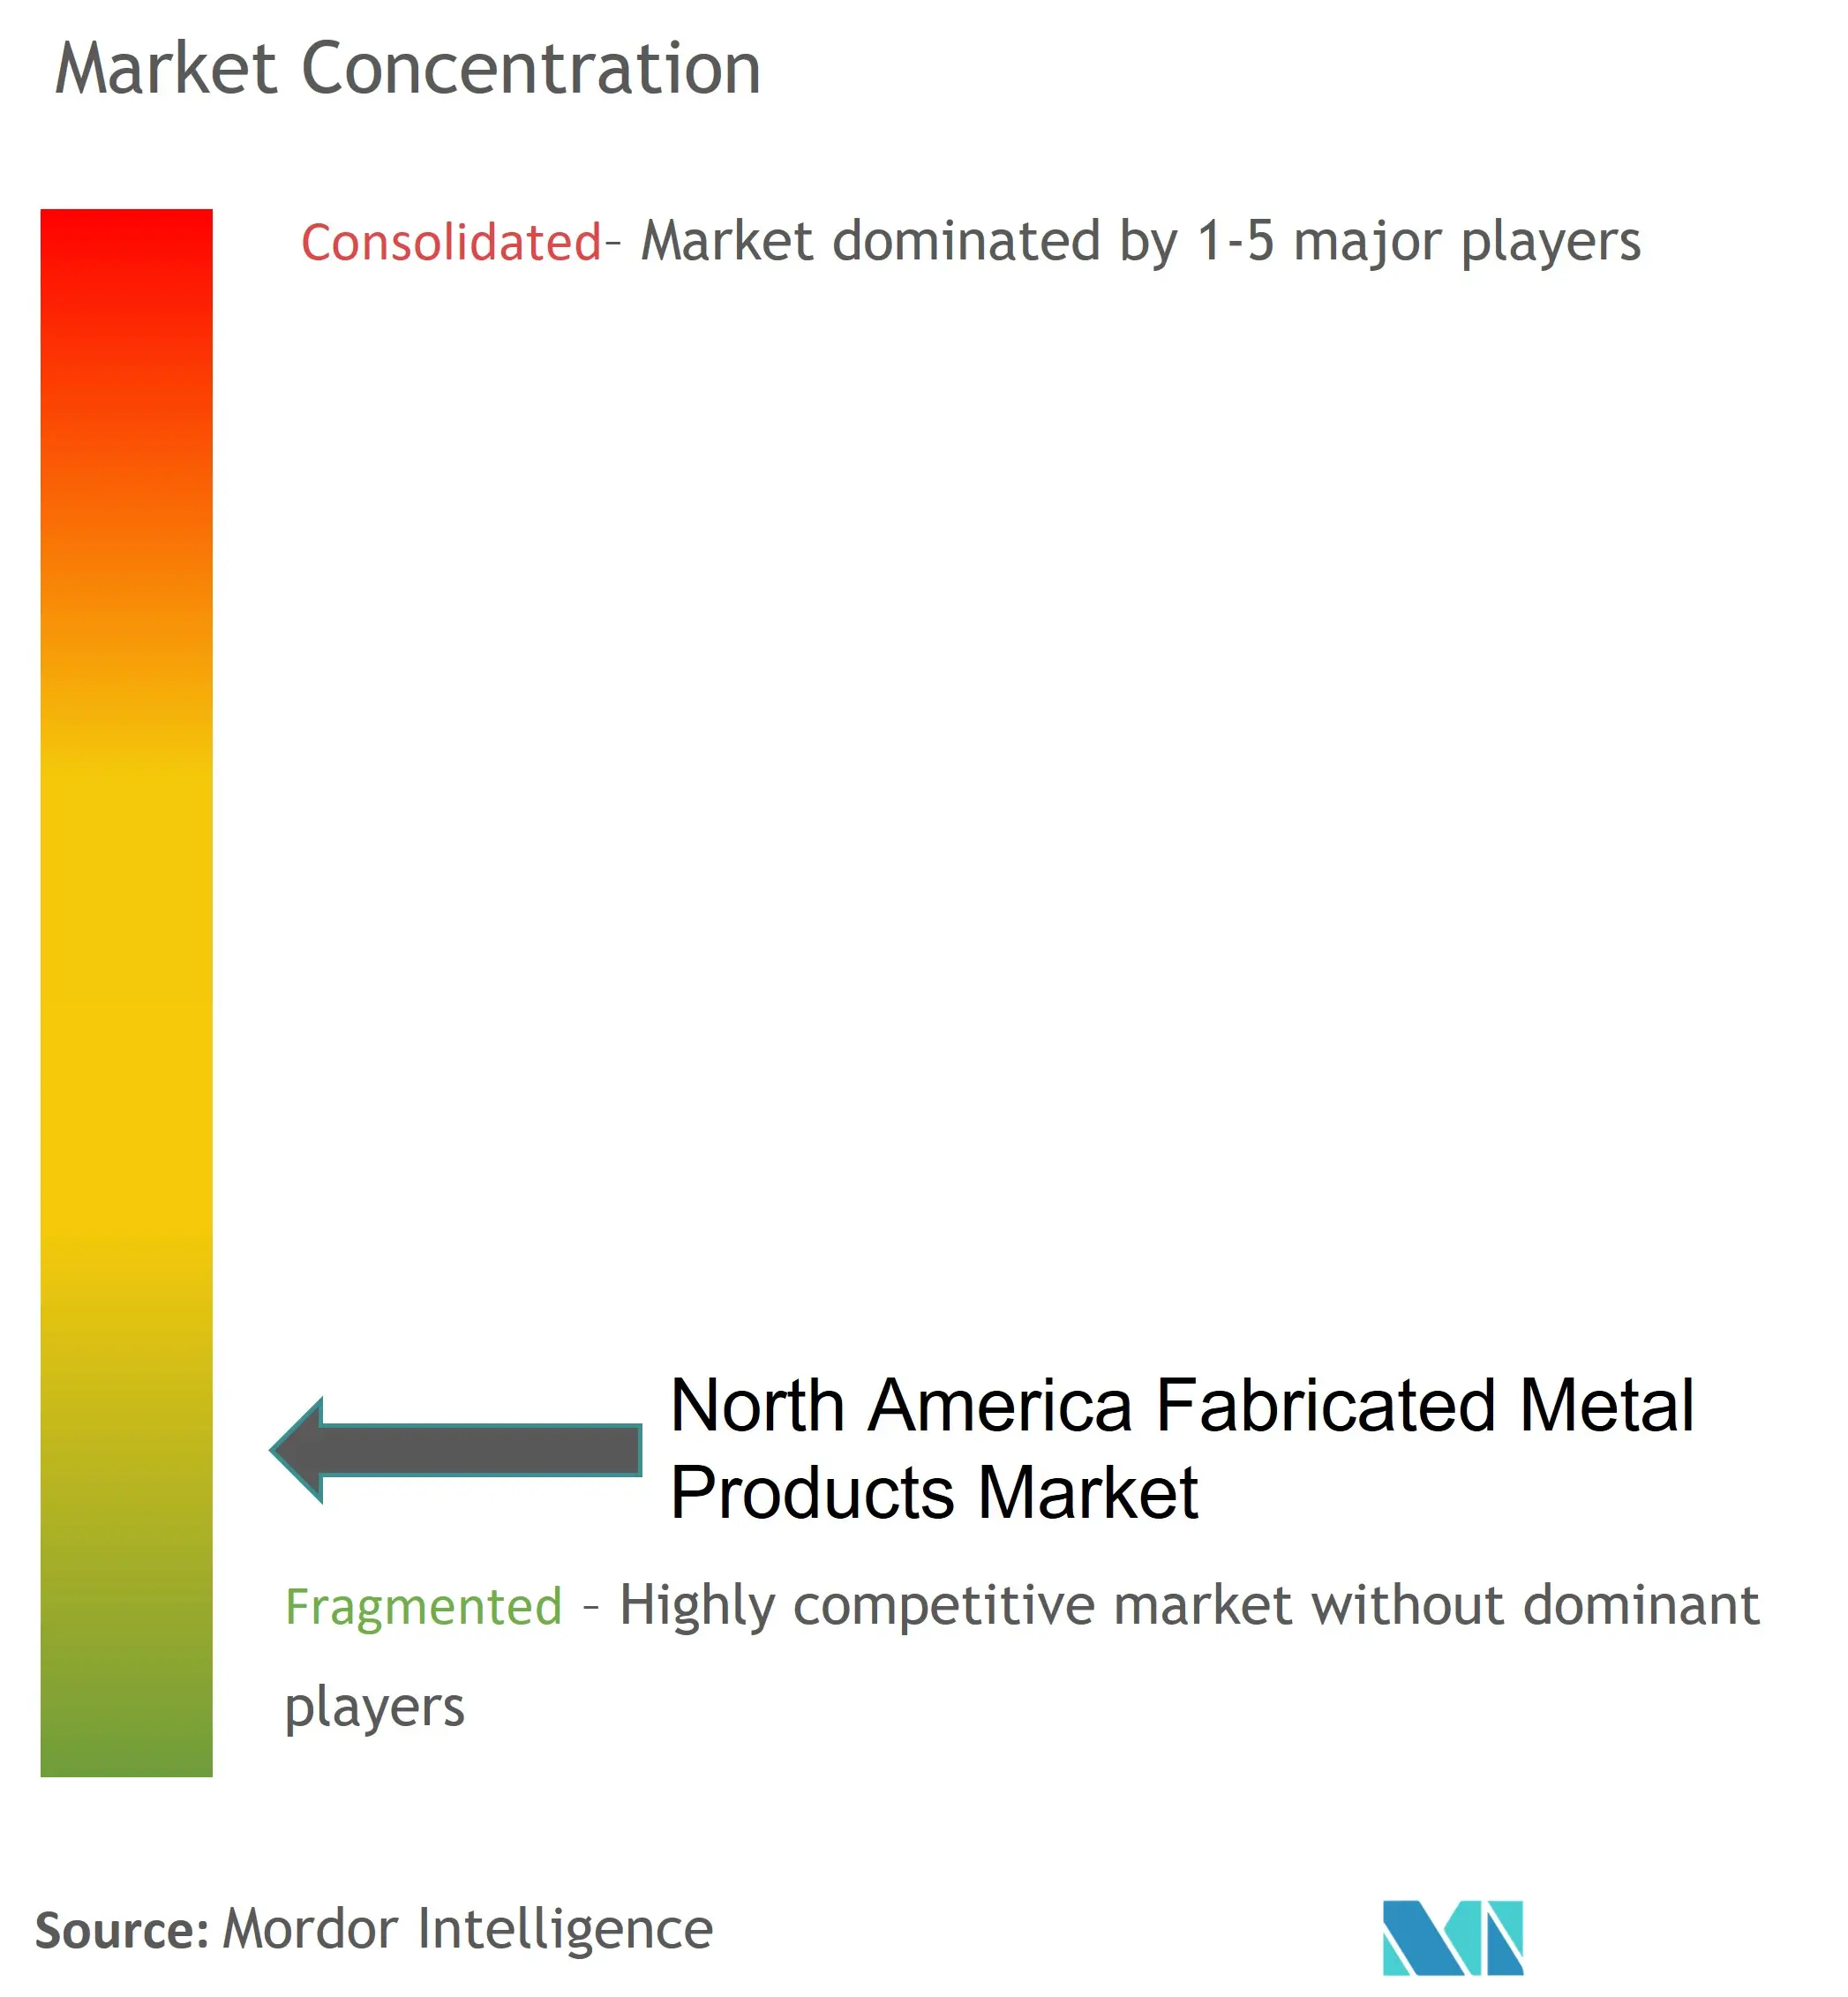 North America Fabricated Metal Products Market Concentration